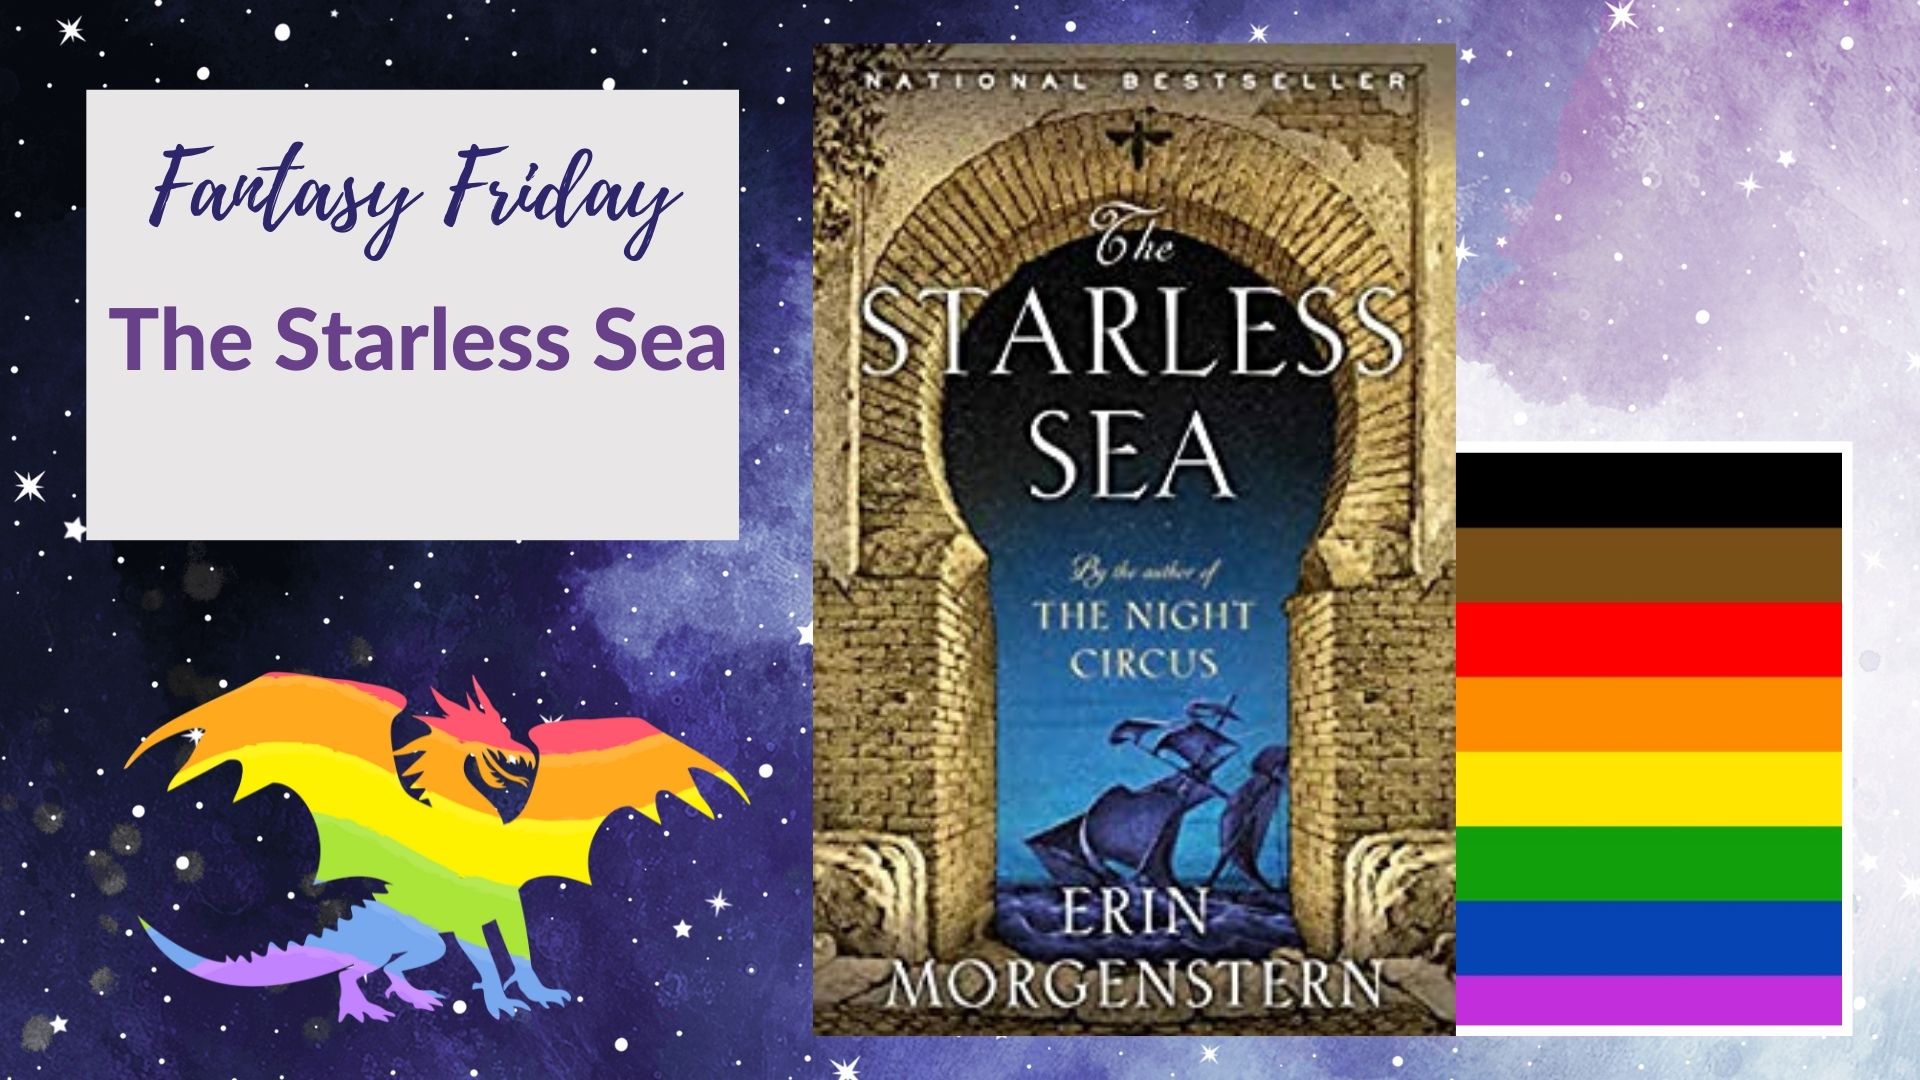 You are currently viewing Fantasy Friday: The Starless Sea by Erin Morgenstern